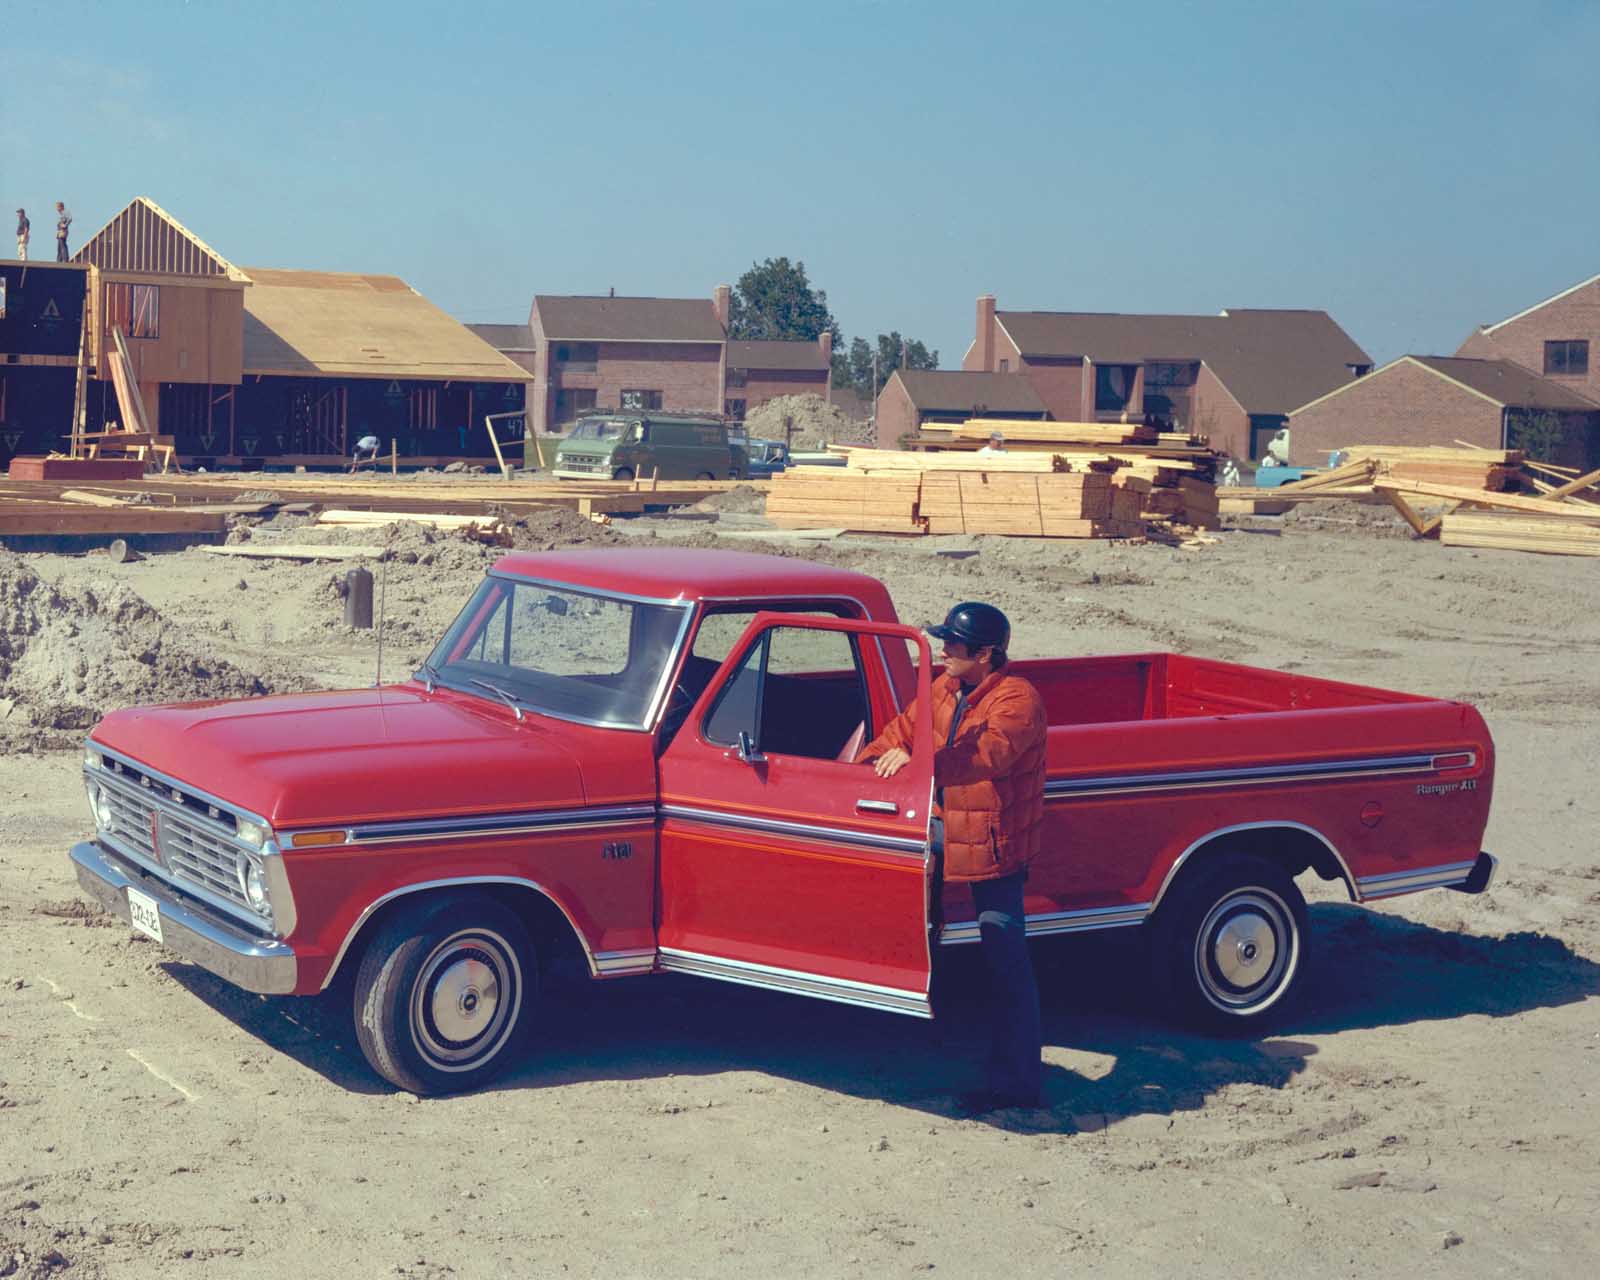 The Ford F-150 pickup truck over the years: A brief history